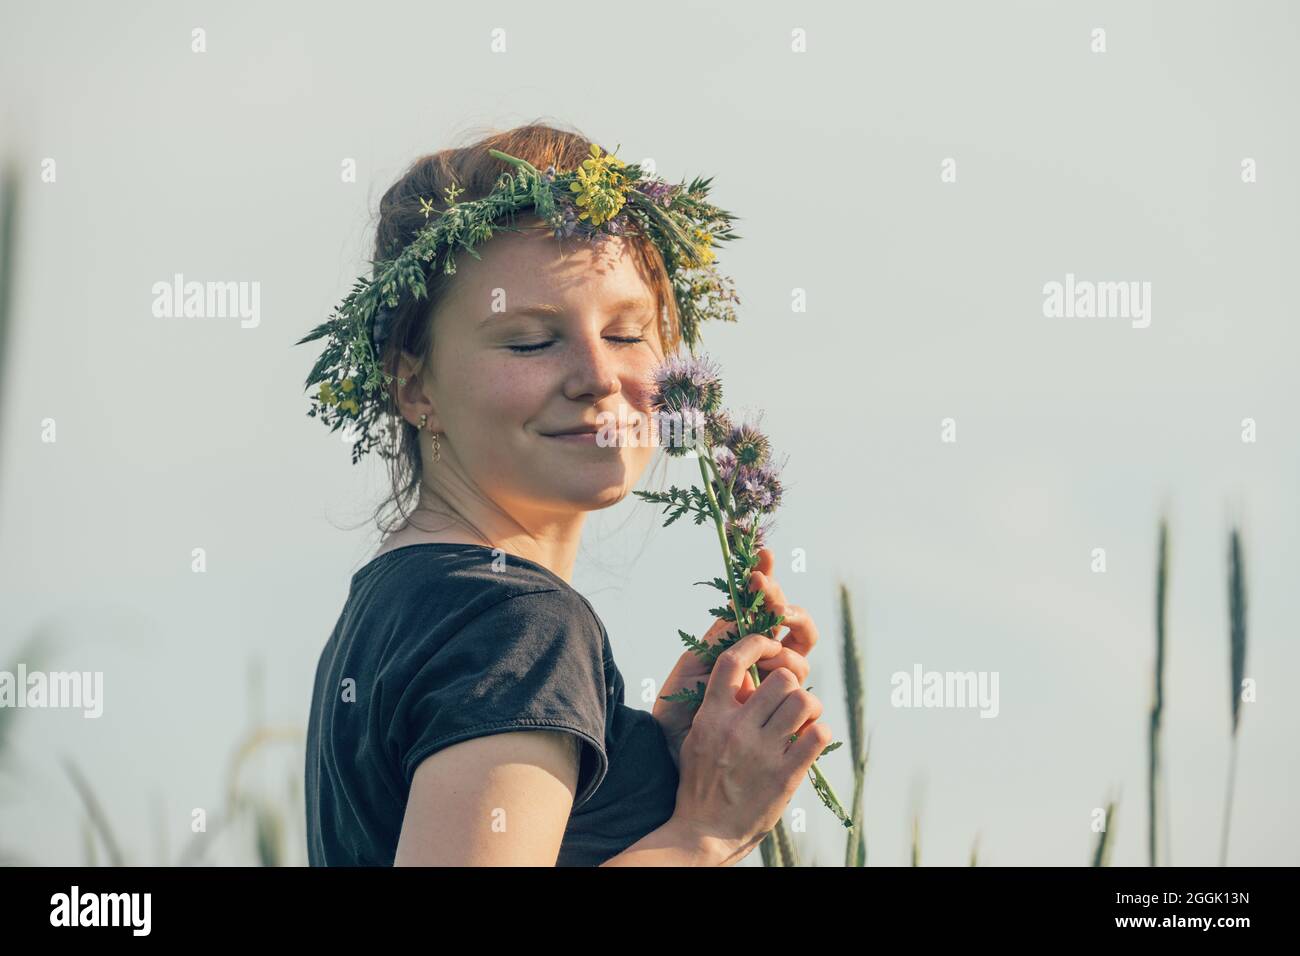 Young woman with wreath of natural flowers on her head, dreamy, holds flowers in her hand Stock Photo